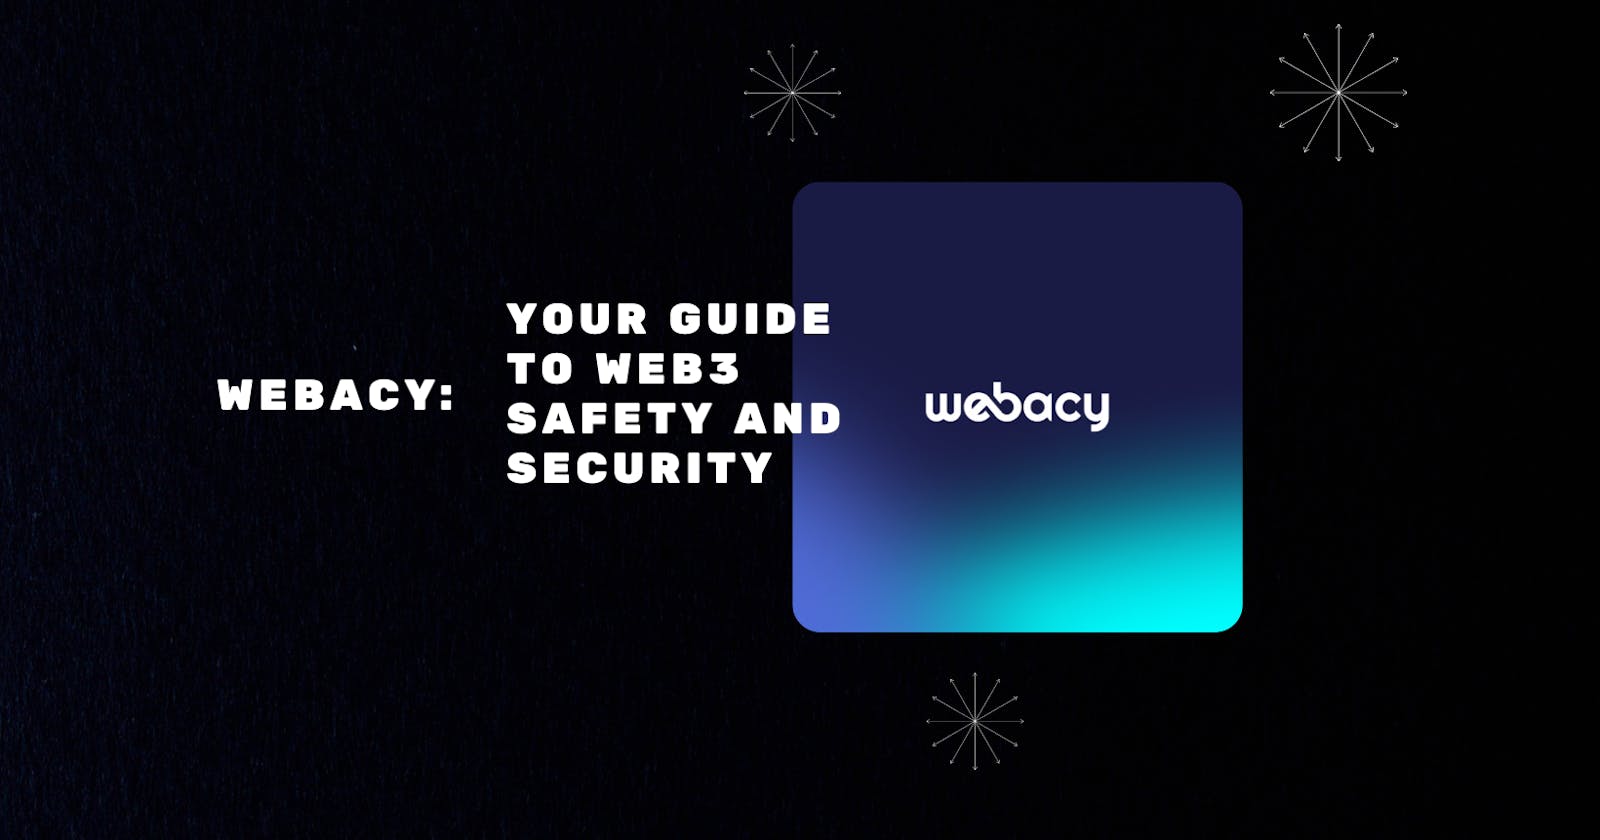 Webacy: Your Guide to Web3 Safety and Security